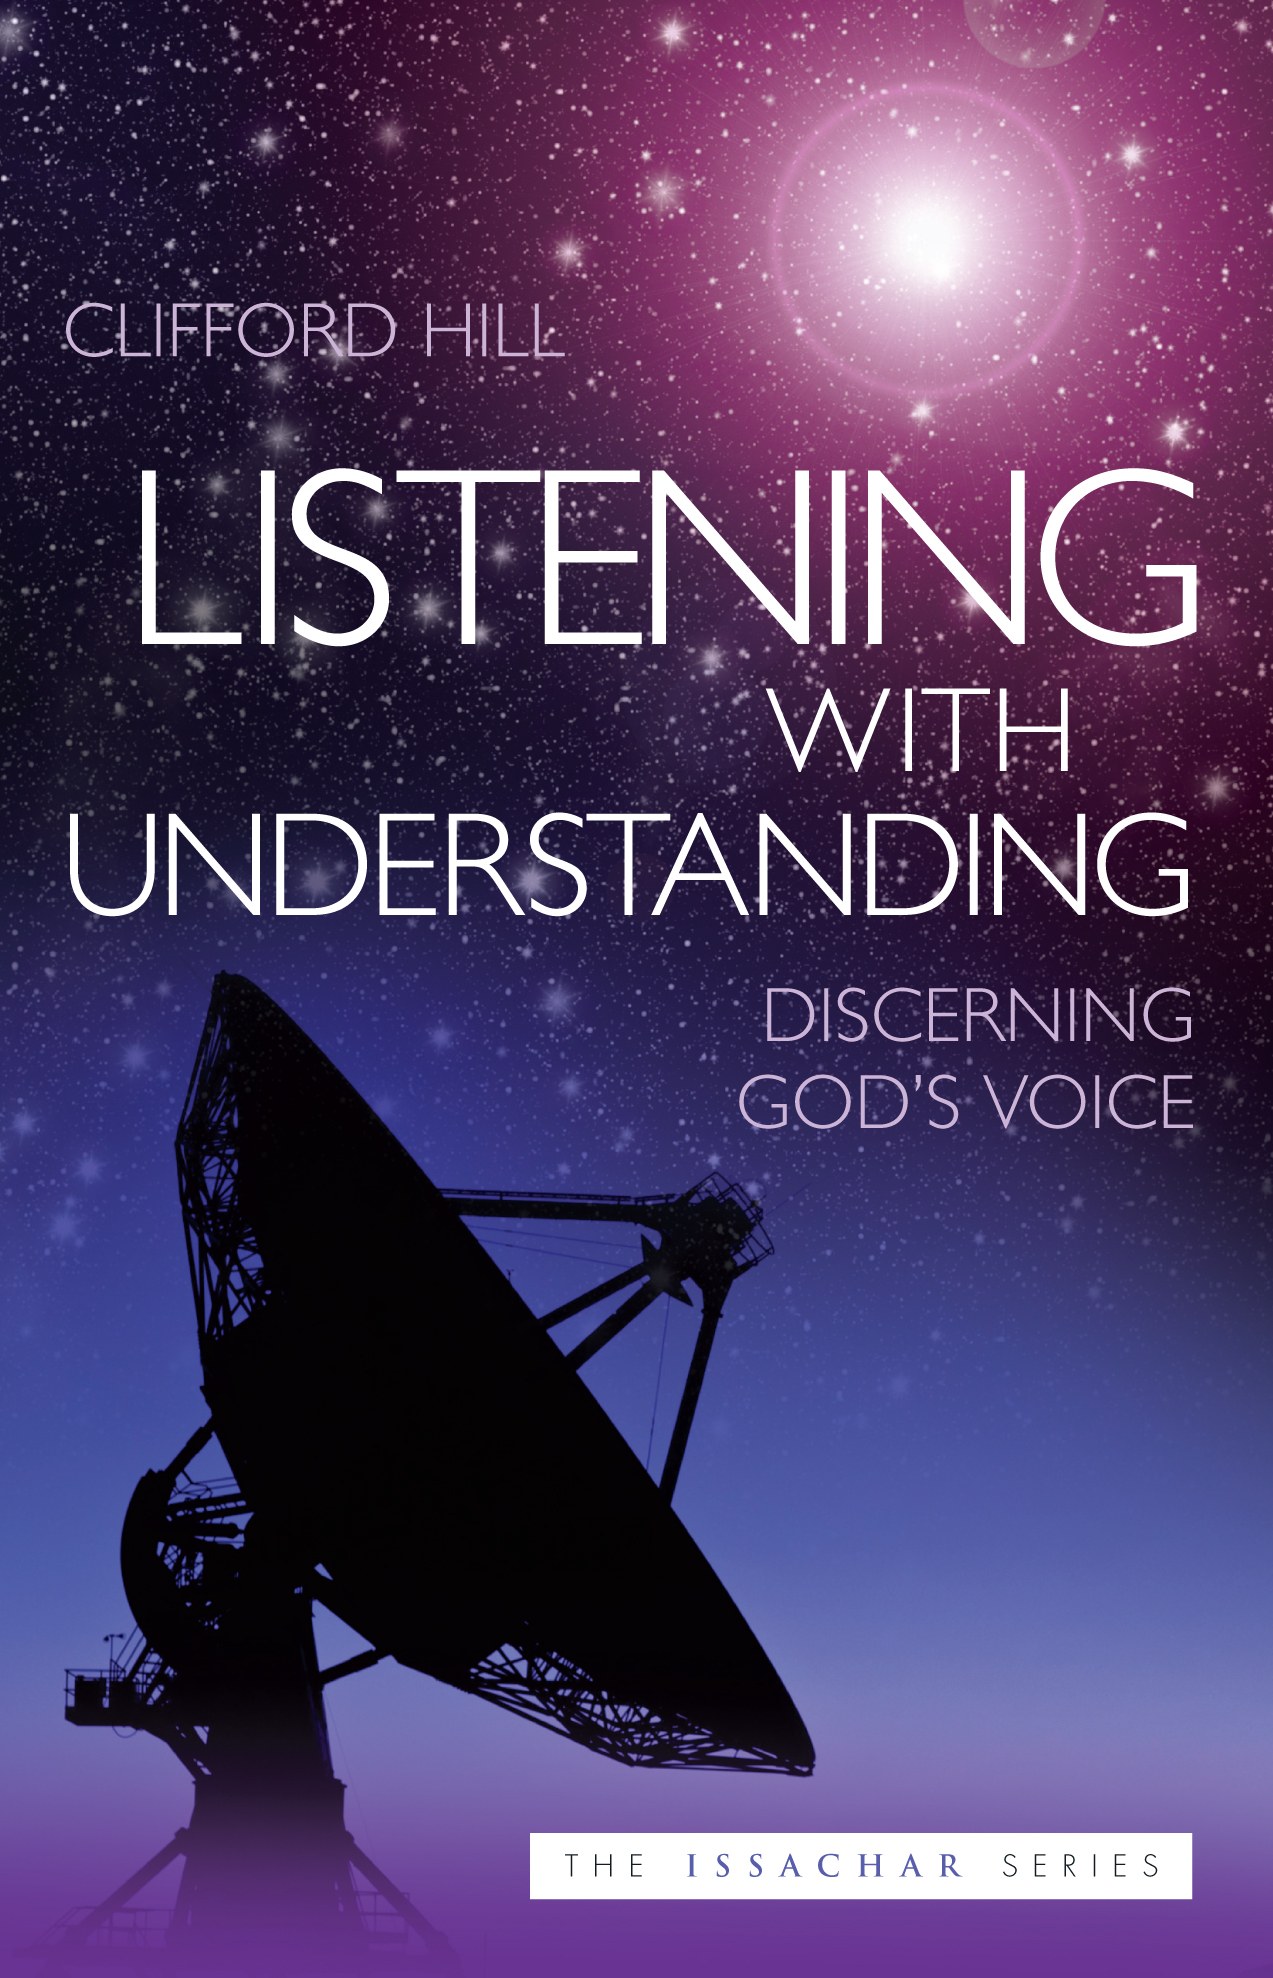 Listening with Understanding. Clifford Hill